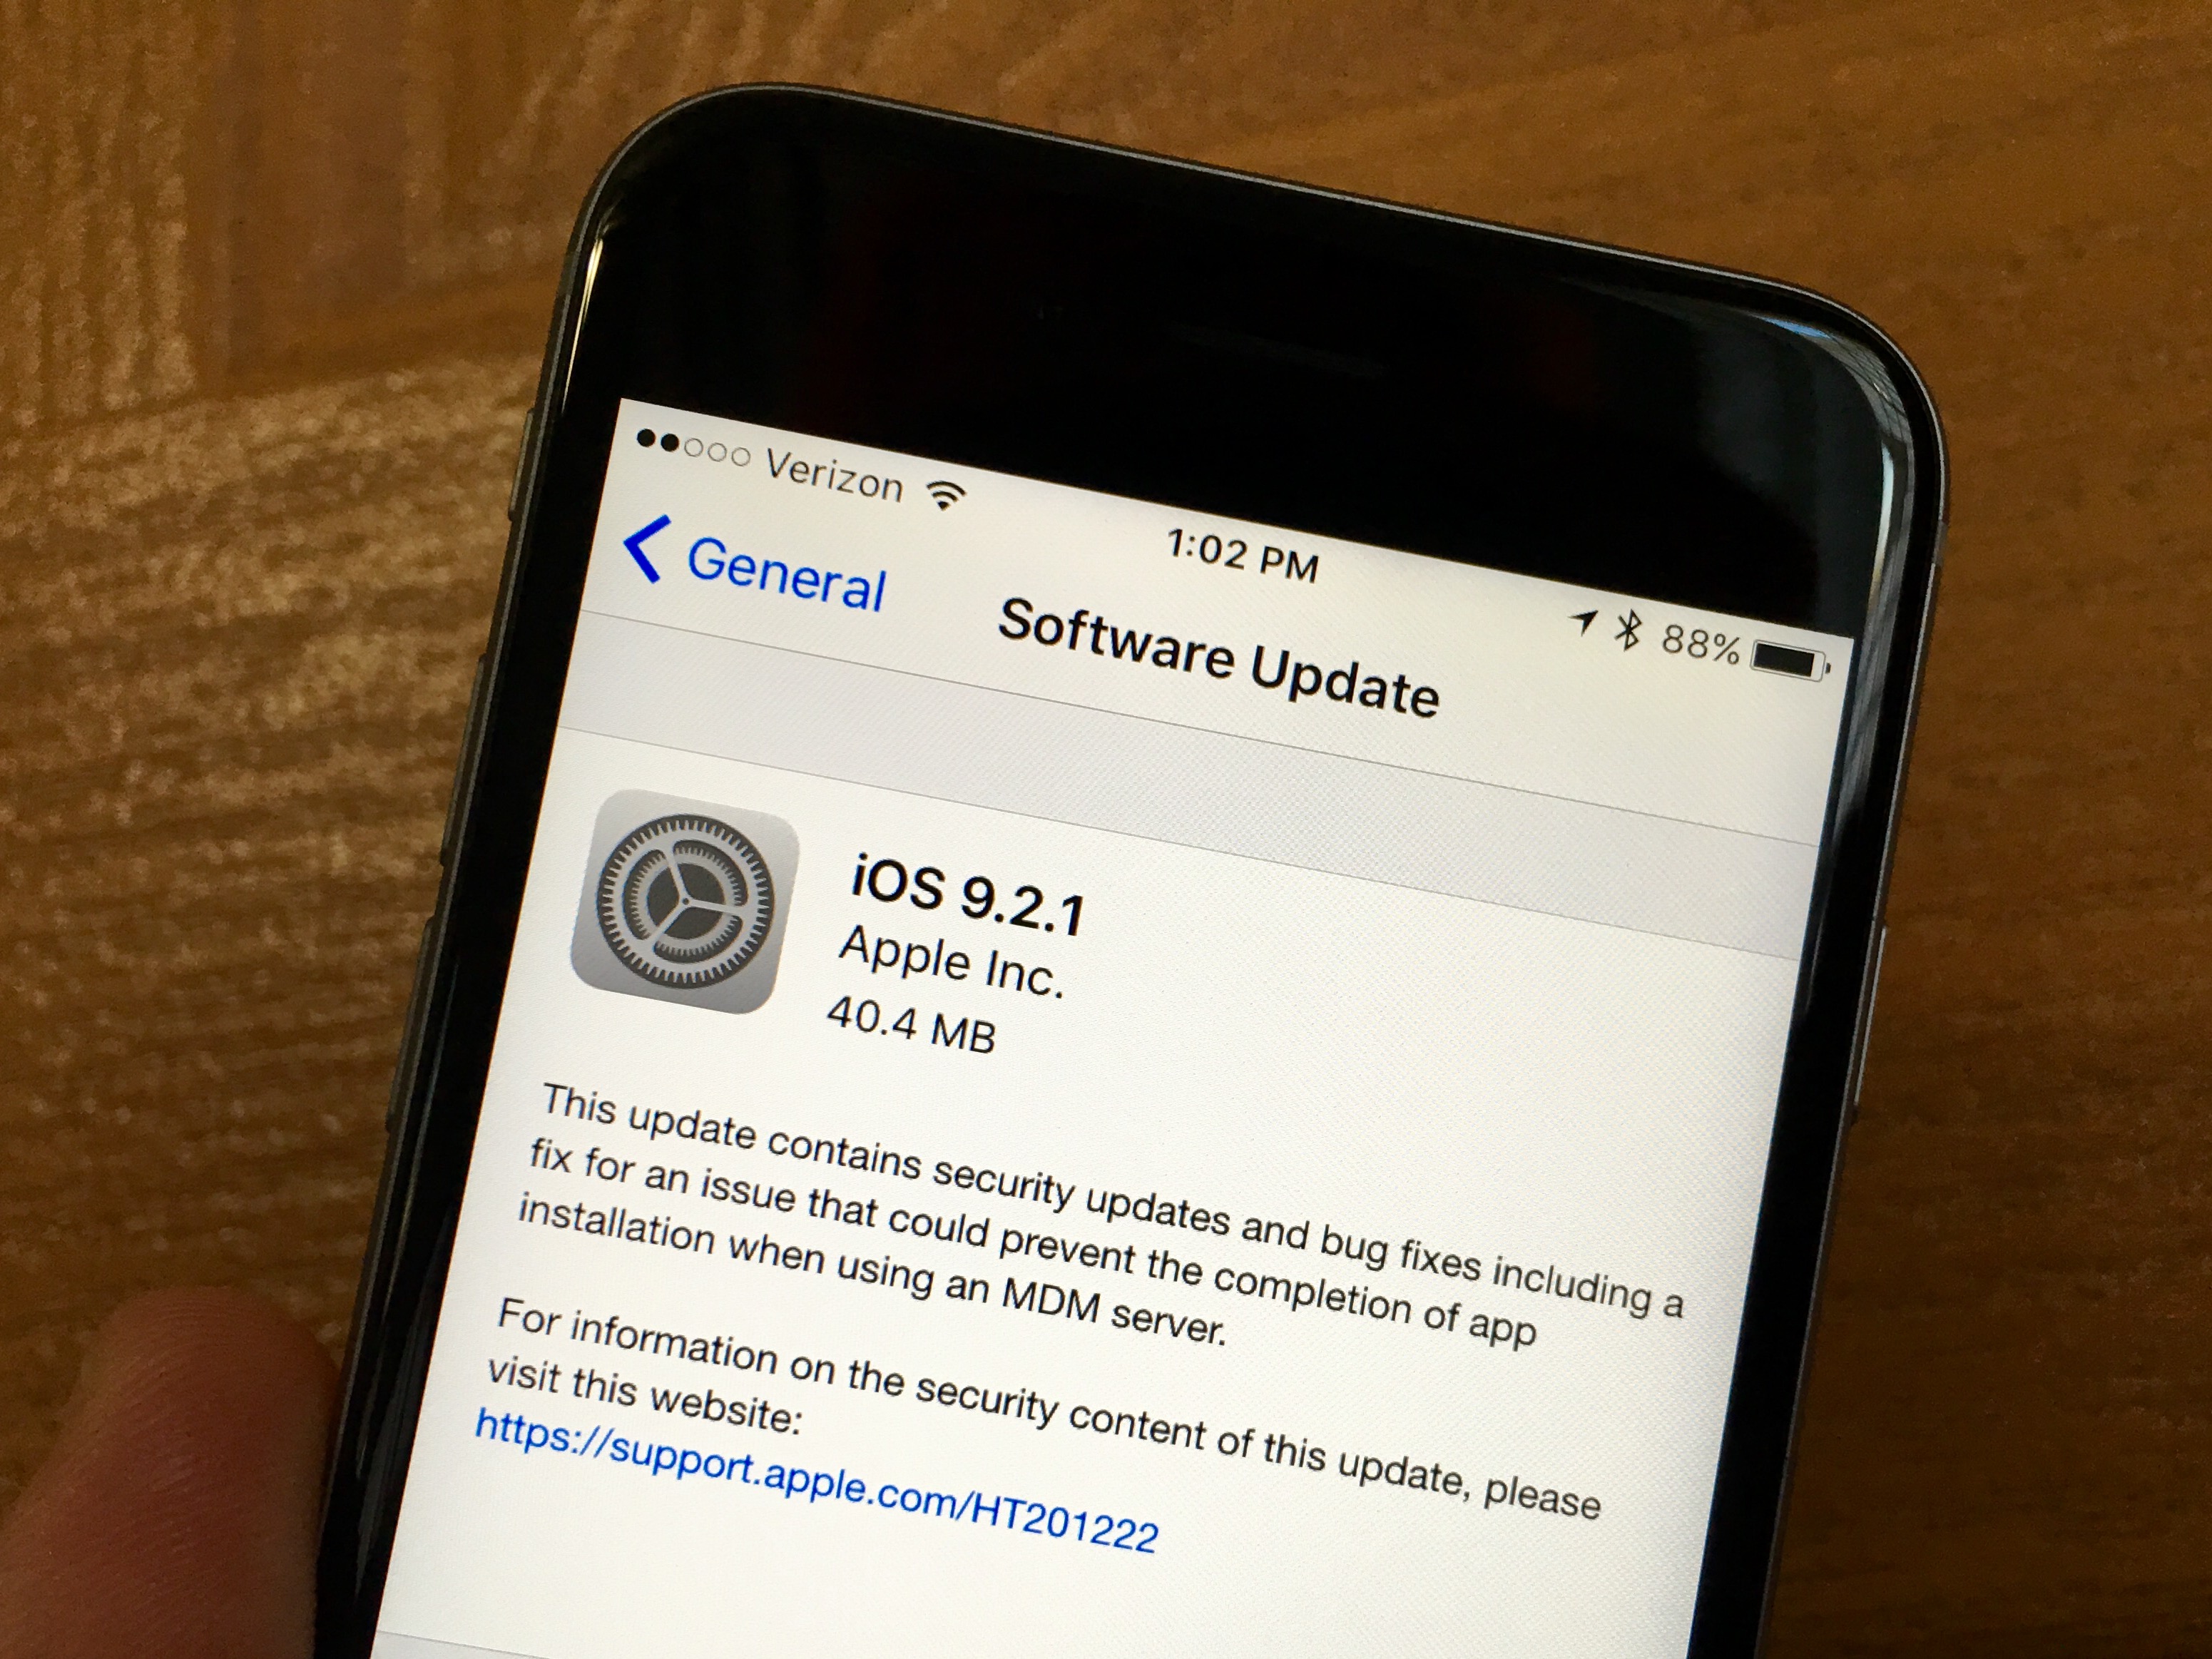 This guide will show you how to install iOS 9.2.1 on iPhone and iPad.